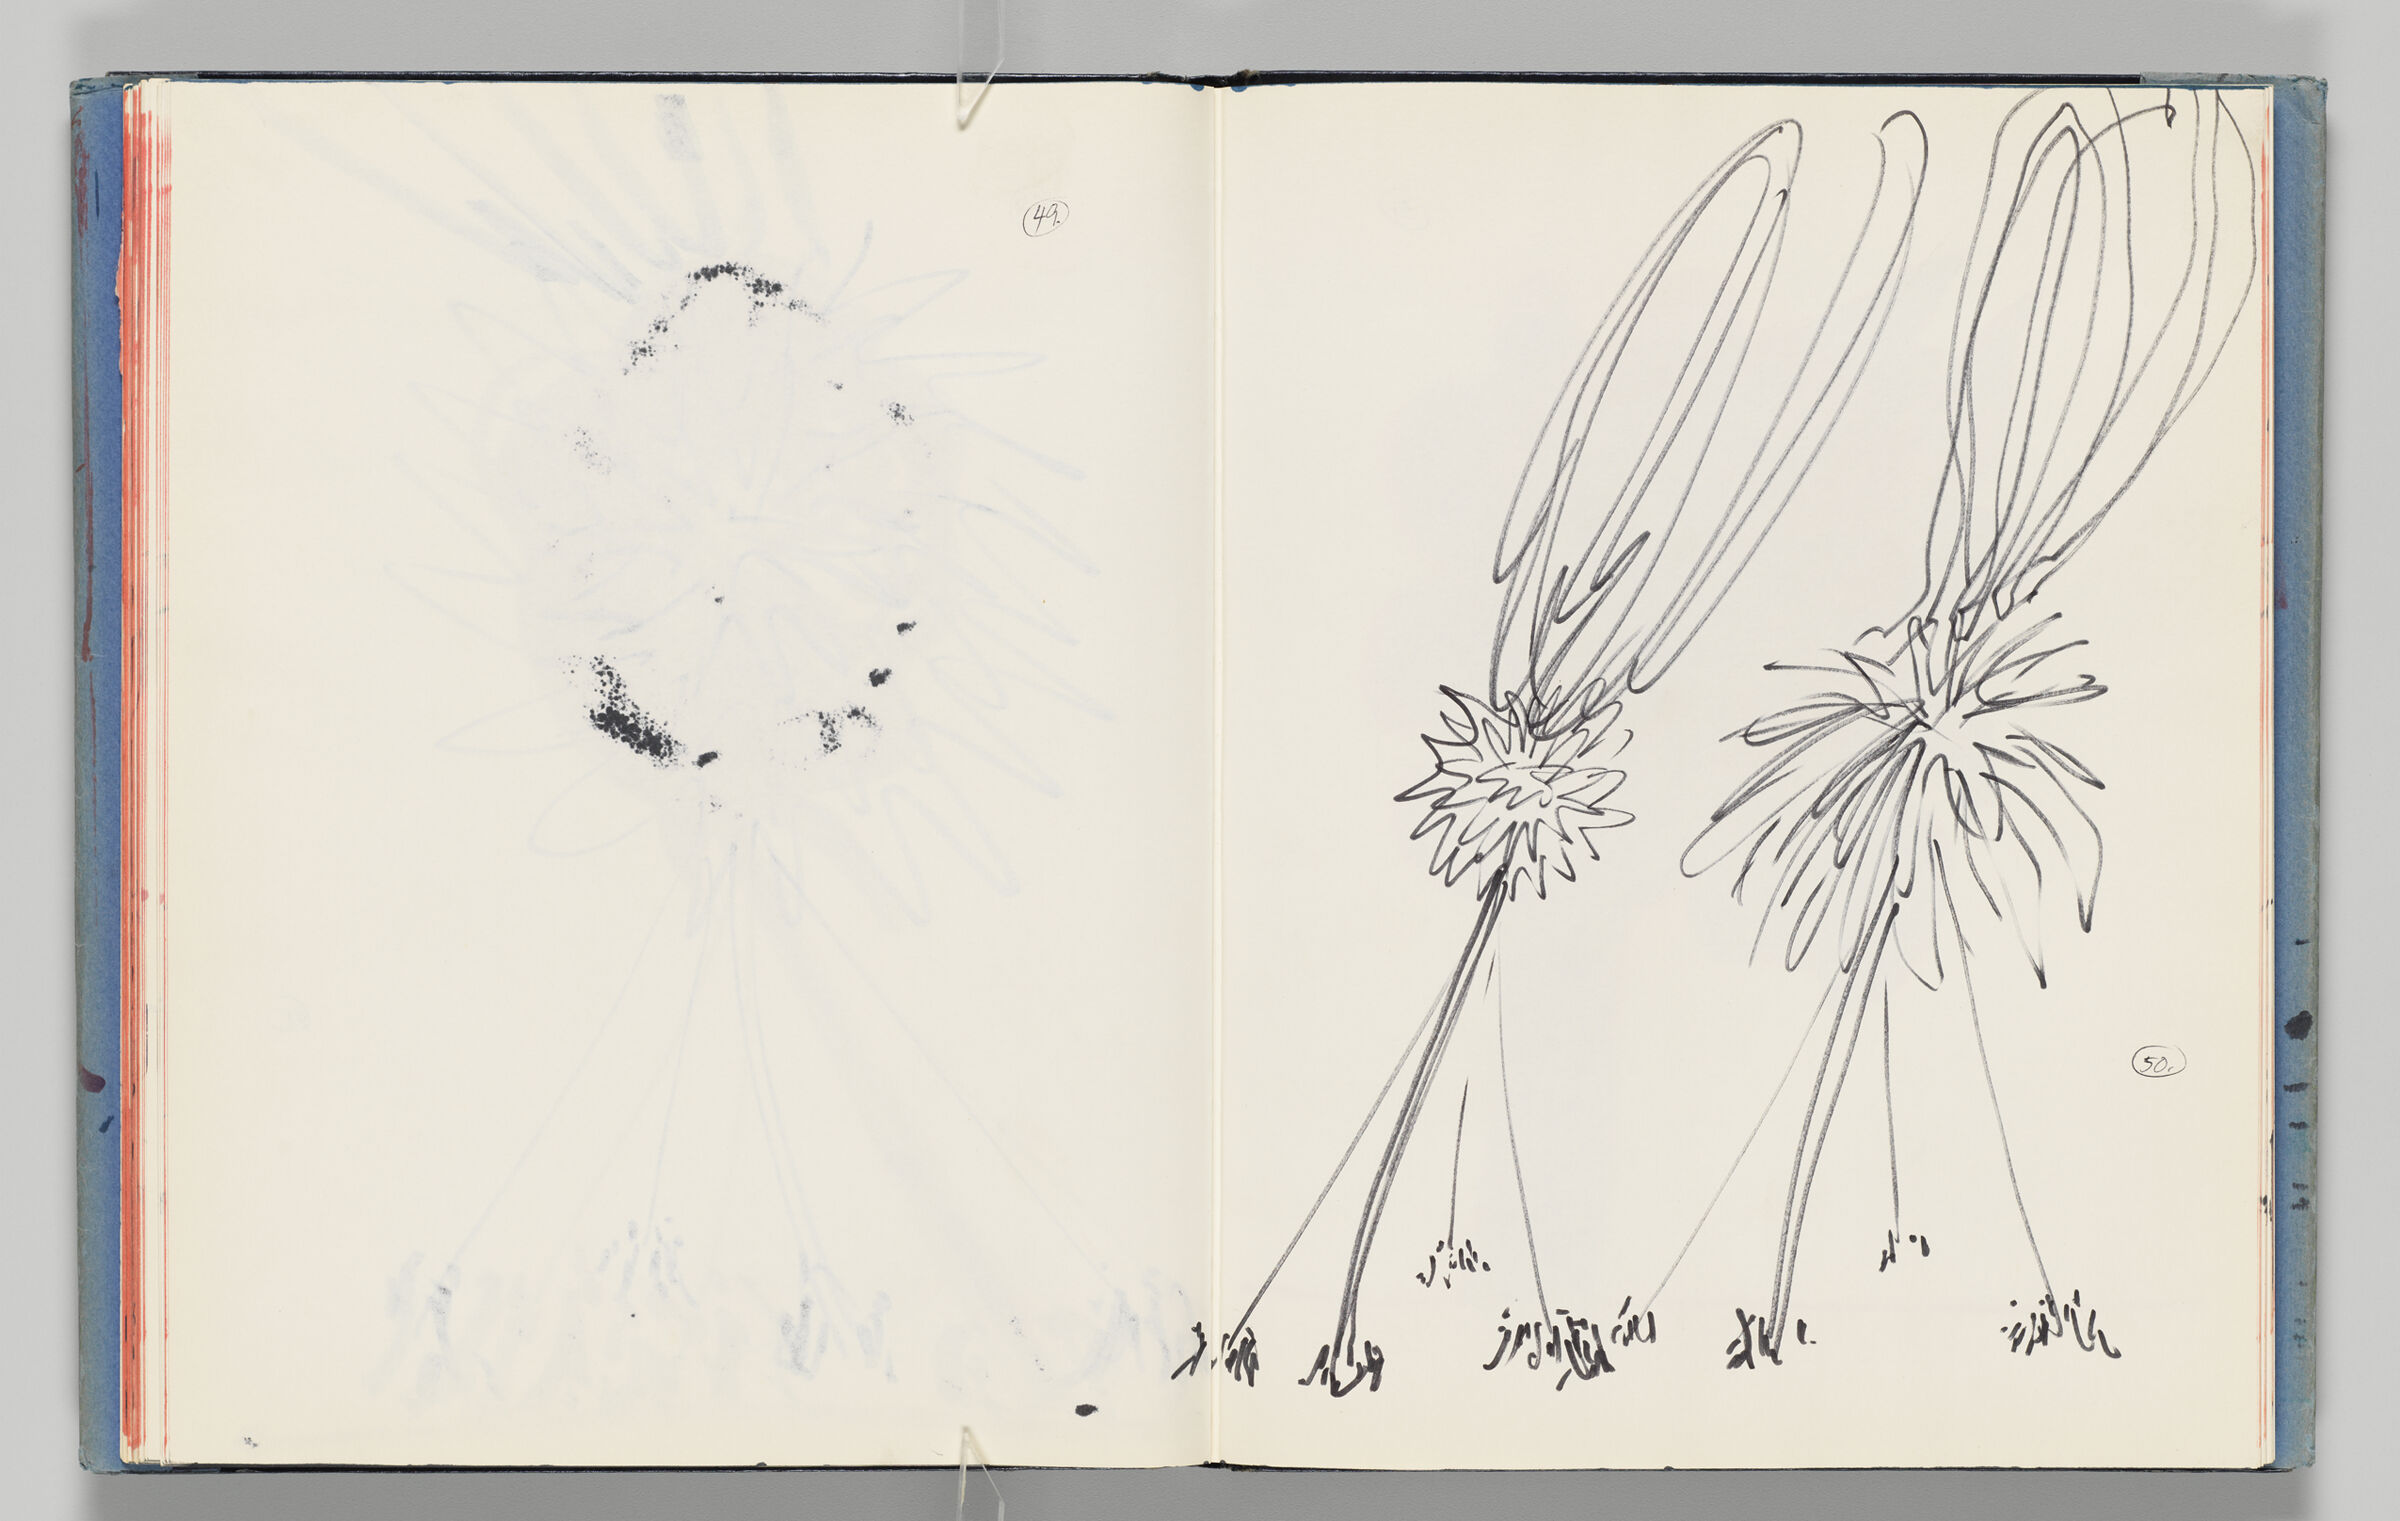 Untitled (Bleed-Through Of Previous Page With Page Number, Left Page); Untitled (Designs For 